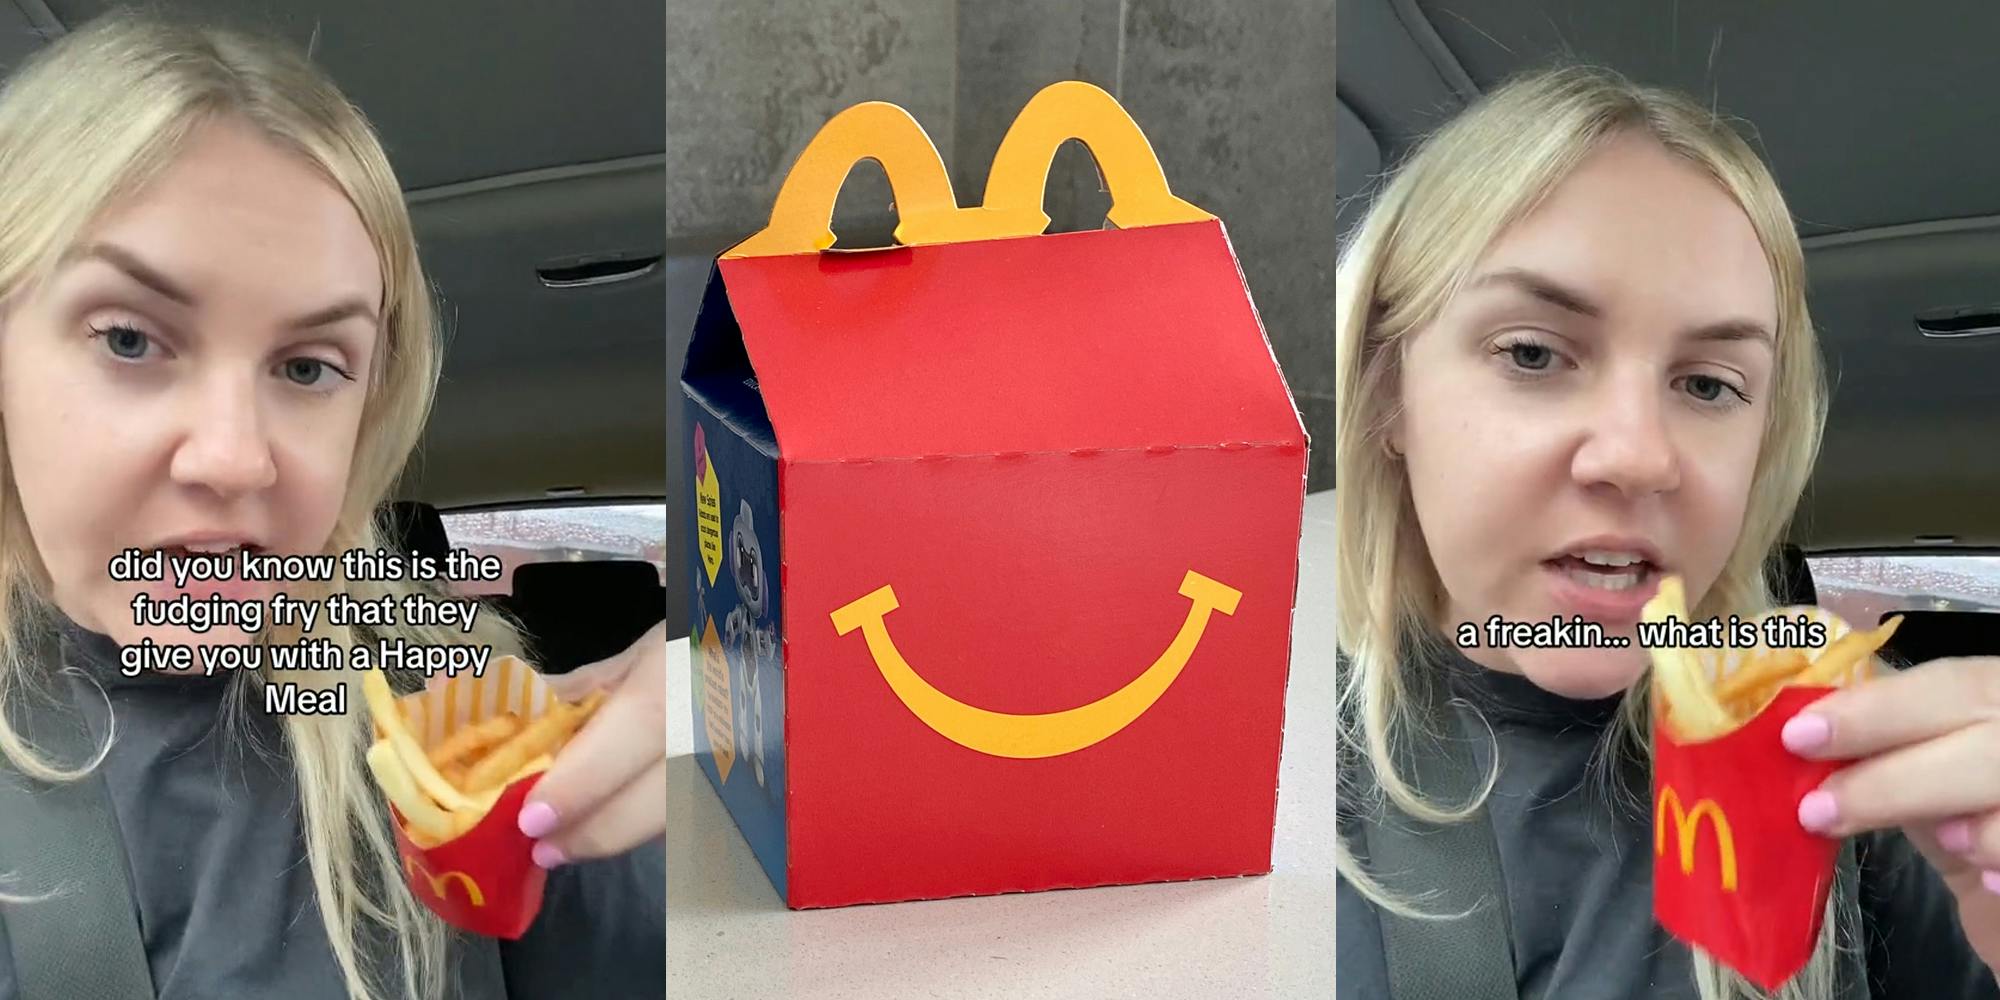 McDonald's customer holding Happy Meal fries in car with caption "did you know this is the fudging fry that they give you with a Happy Meal" (l) McDonald's Happy Meal on table (c) McDonald's customer holding Happy Meal fries in car with caption "a freakin...what is this" (r)